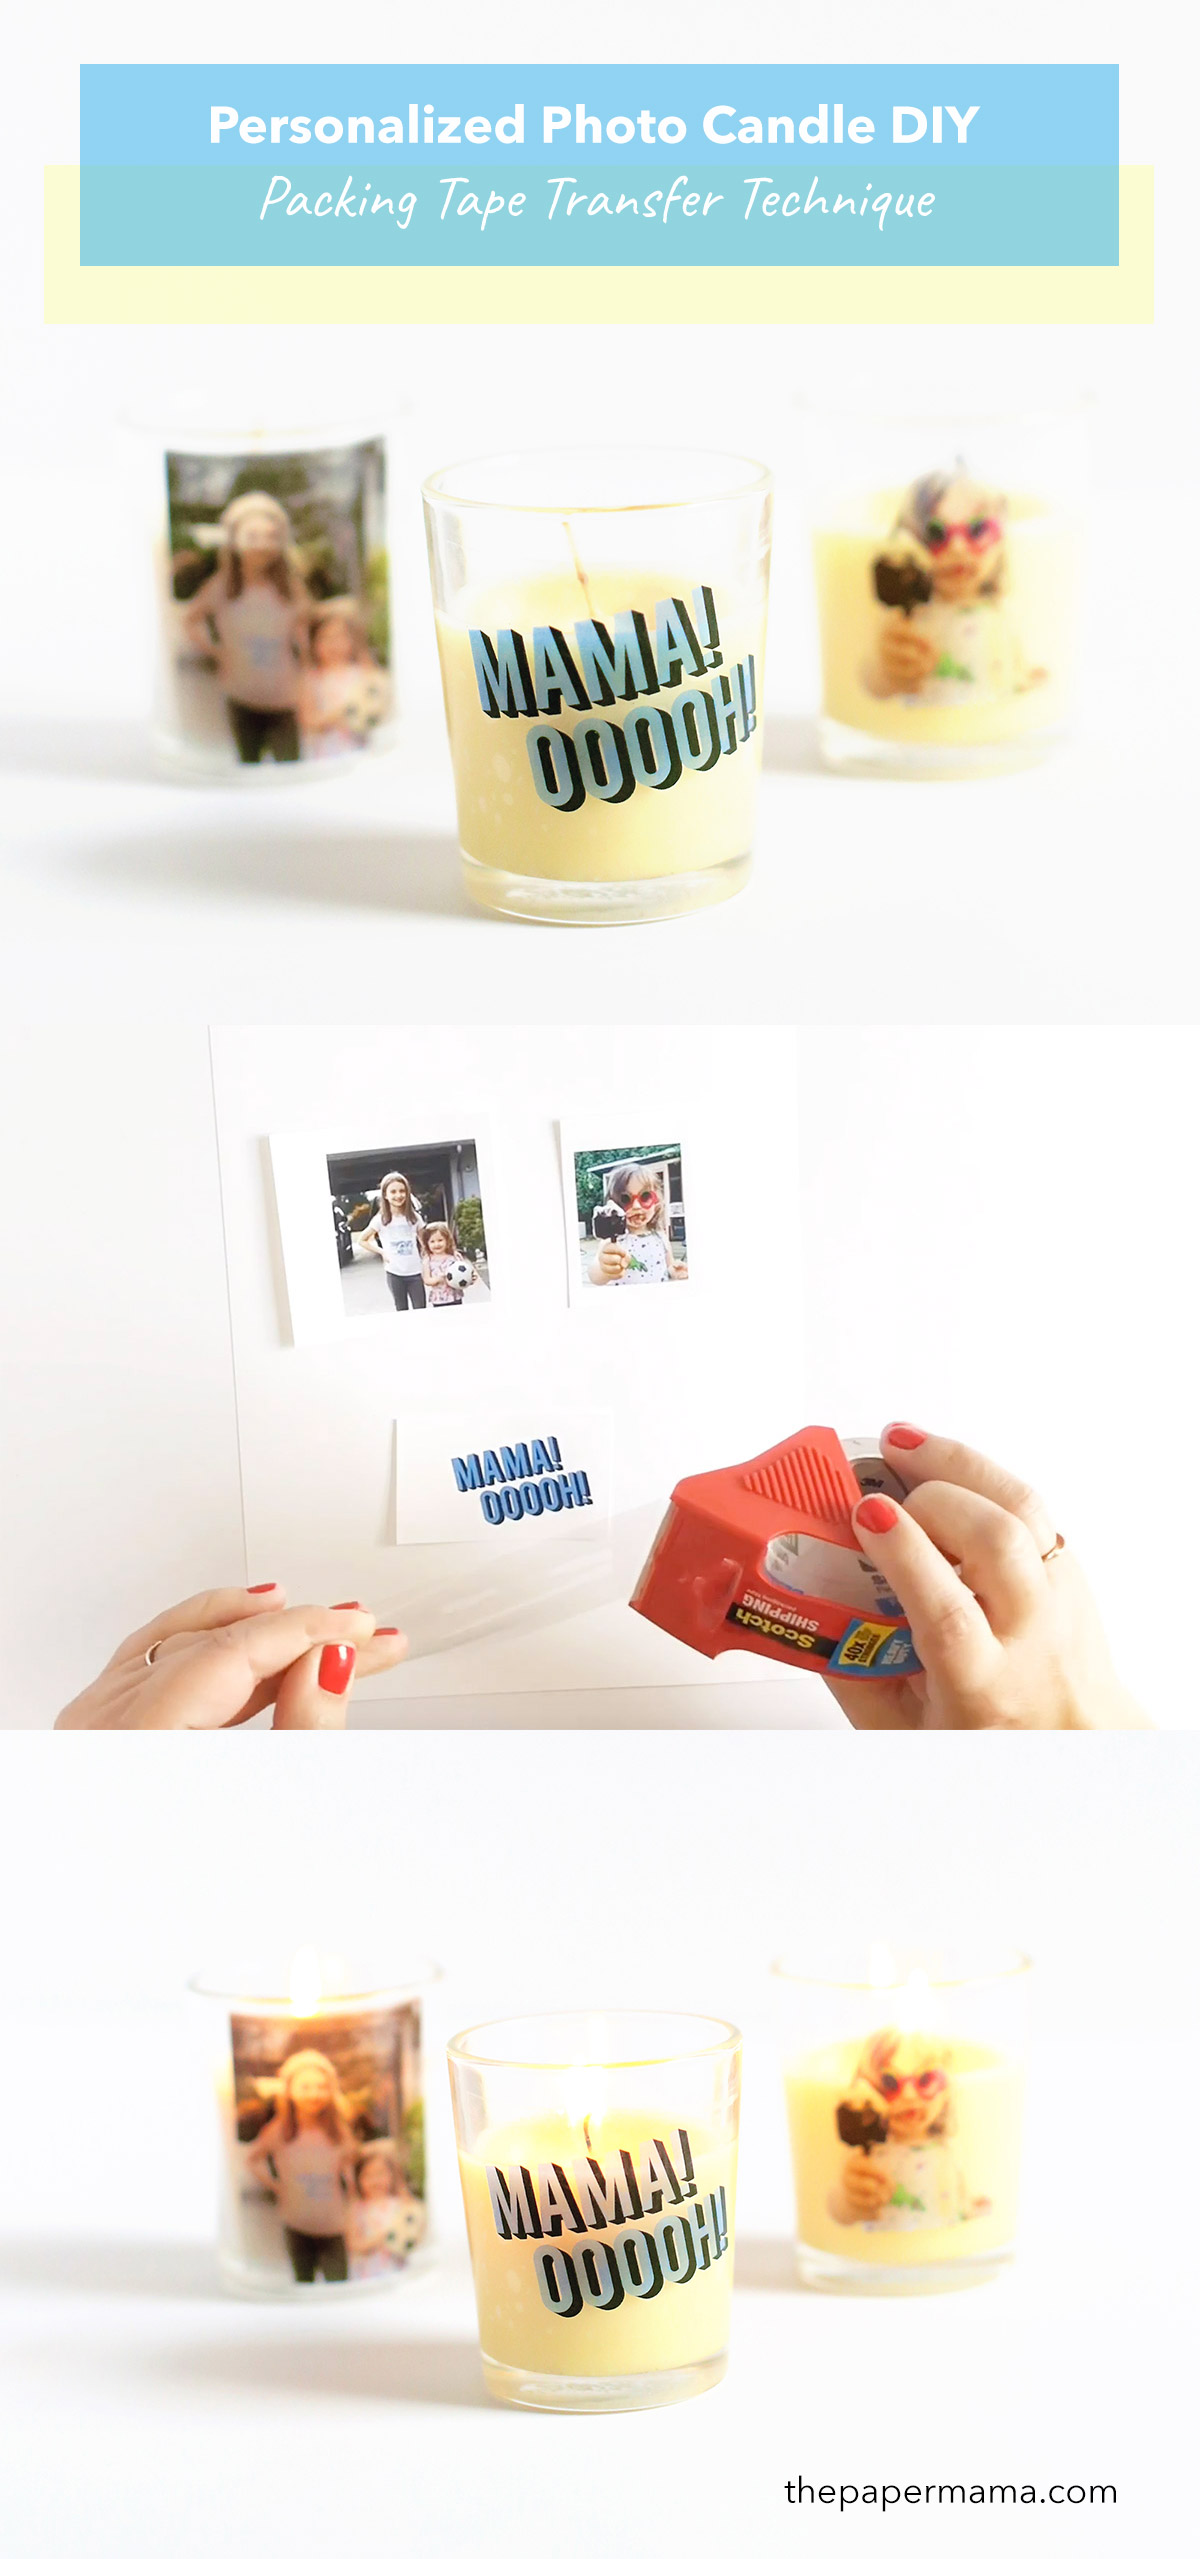 Personalized Photo Candle DIY - Packing Tape Photo Transfer Technique